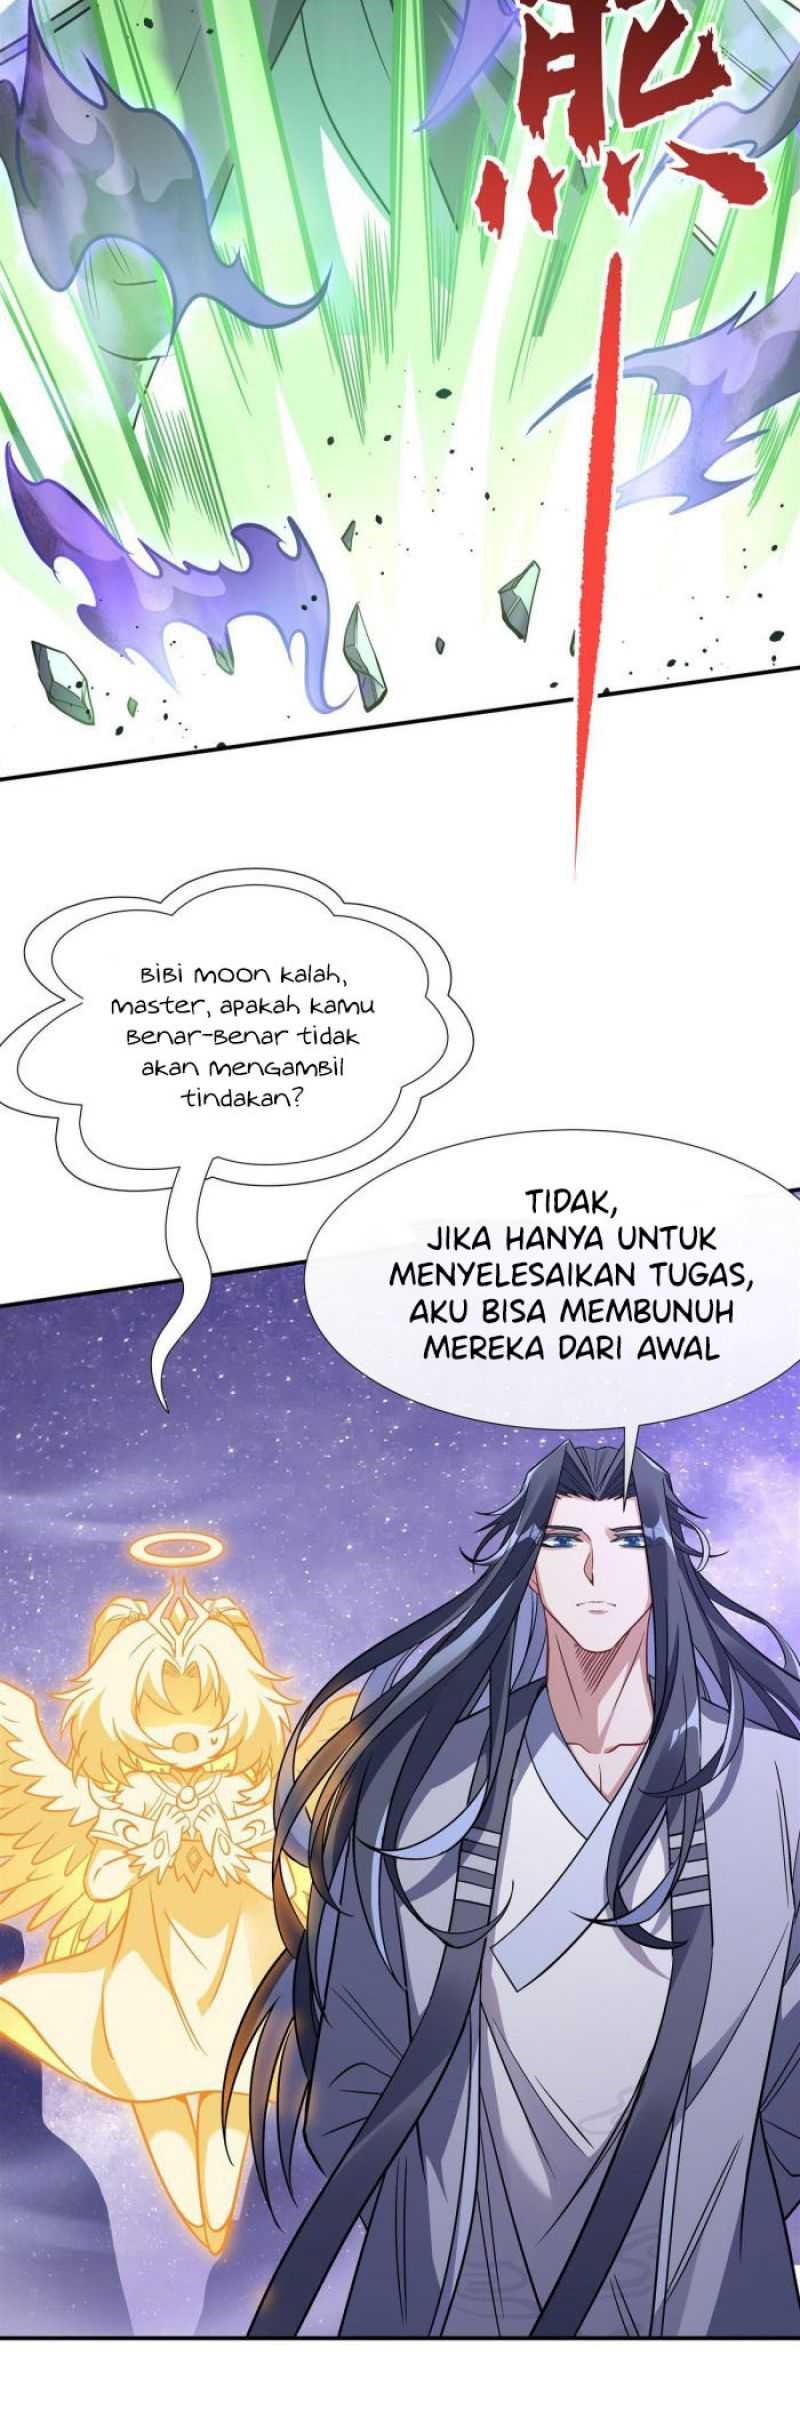 Dilarang COPAS - situs resmi www.mangacanblog.com - Komik my female apprentices are all big shots from the future 111 - chapter 111 112 Indonesia my female apprentices are all big shots from the future 111 - chapter 111 Terbaru 12|Baca Manga Komik Indonesia|Mangacan